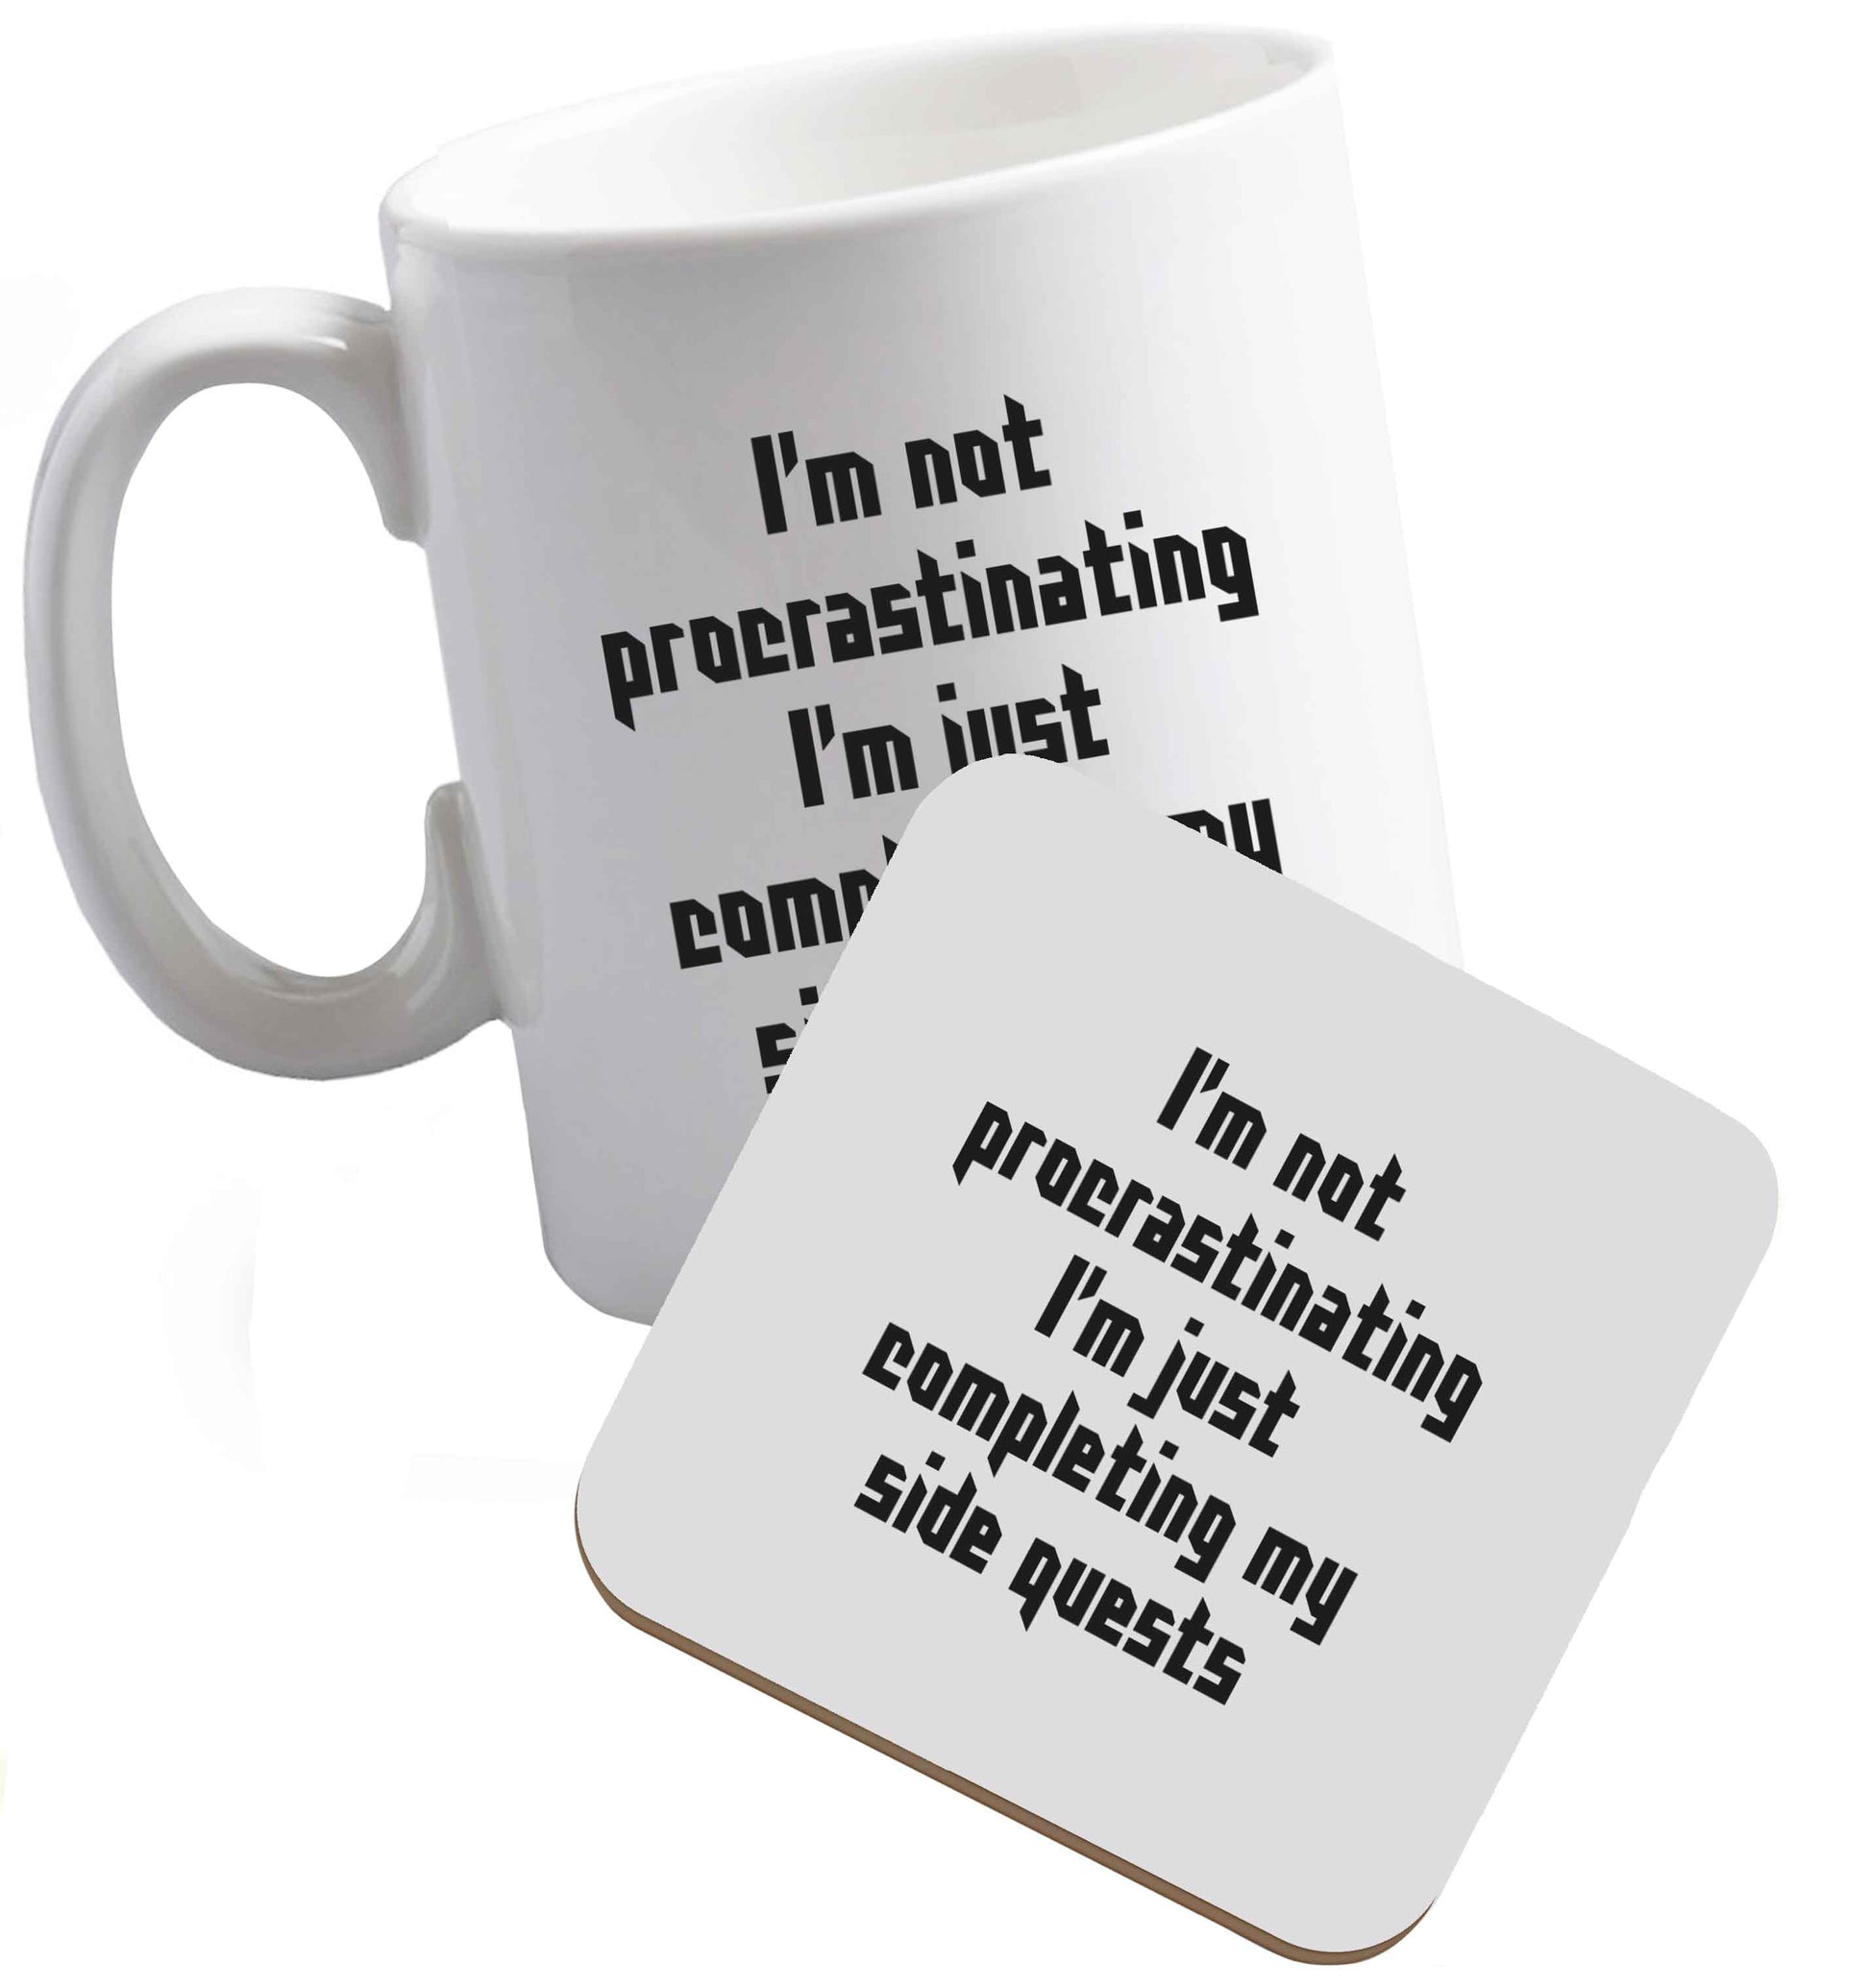 10 oz I'm not procrastinating I'm just completing my side quests ceramic mug and coaster set right handed